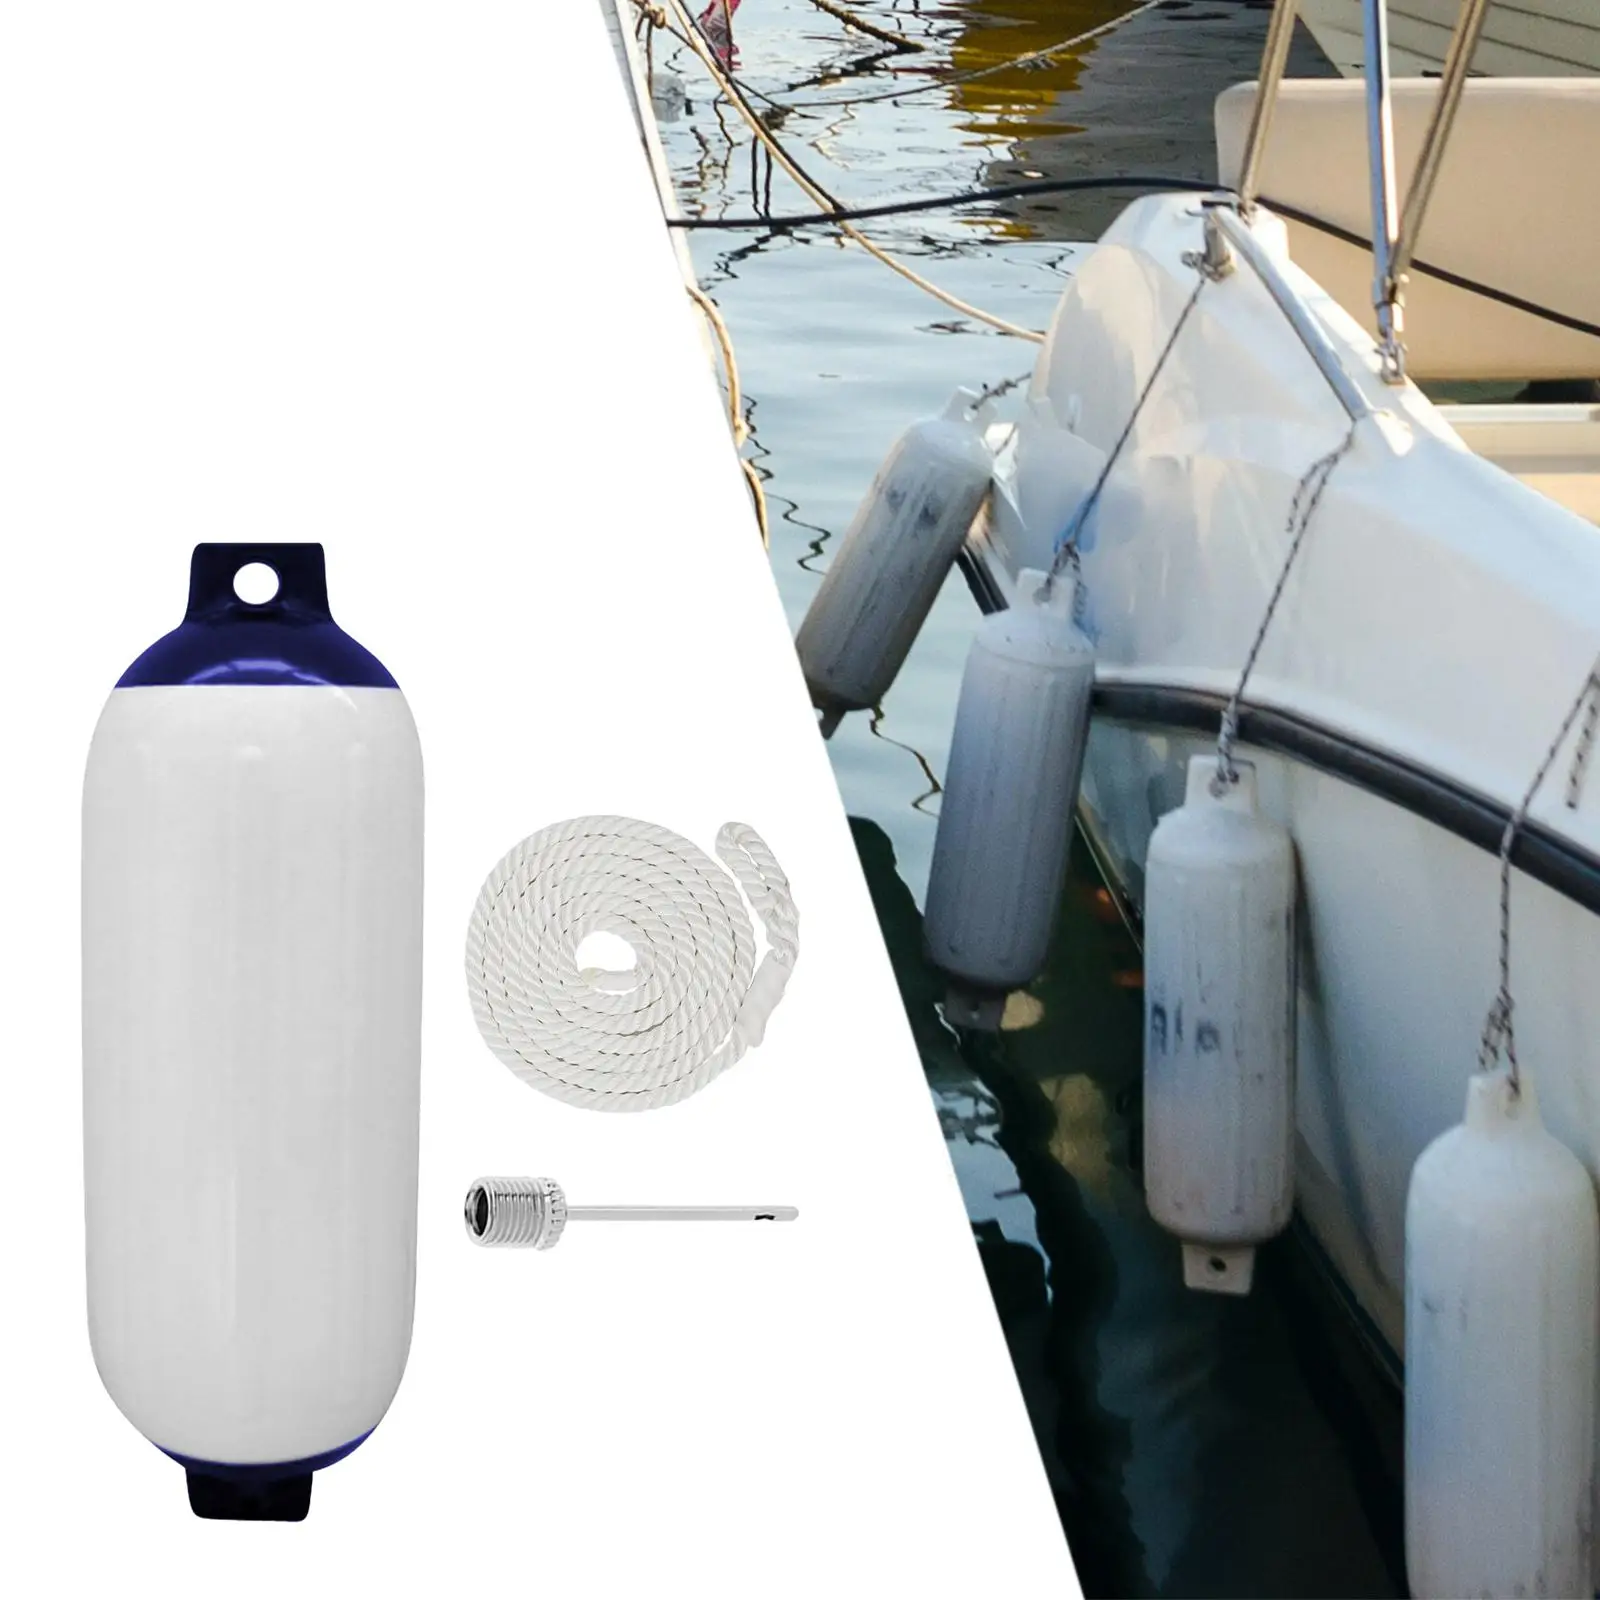 

Boat Fender PVC Buoy Boat Accessories Boat Bumper Anti Collision Protection for Docking Speedboat Pontoon Yacht Fishing Boats